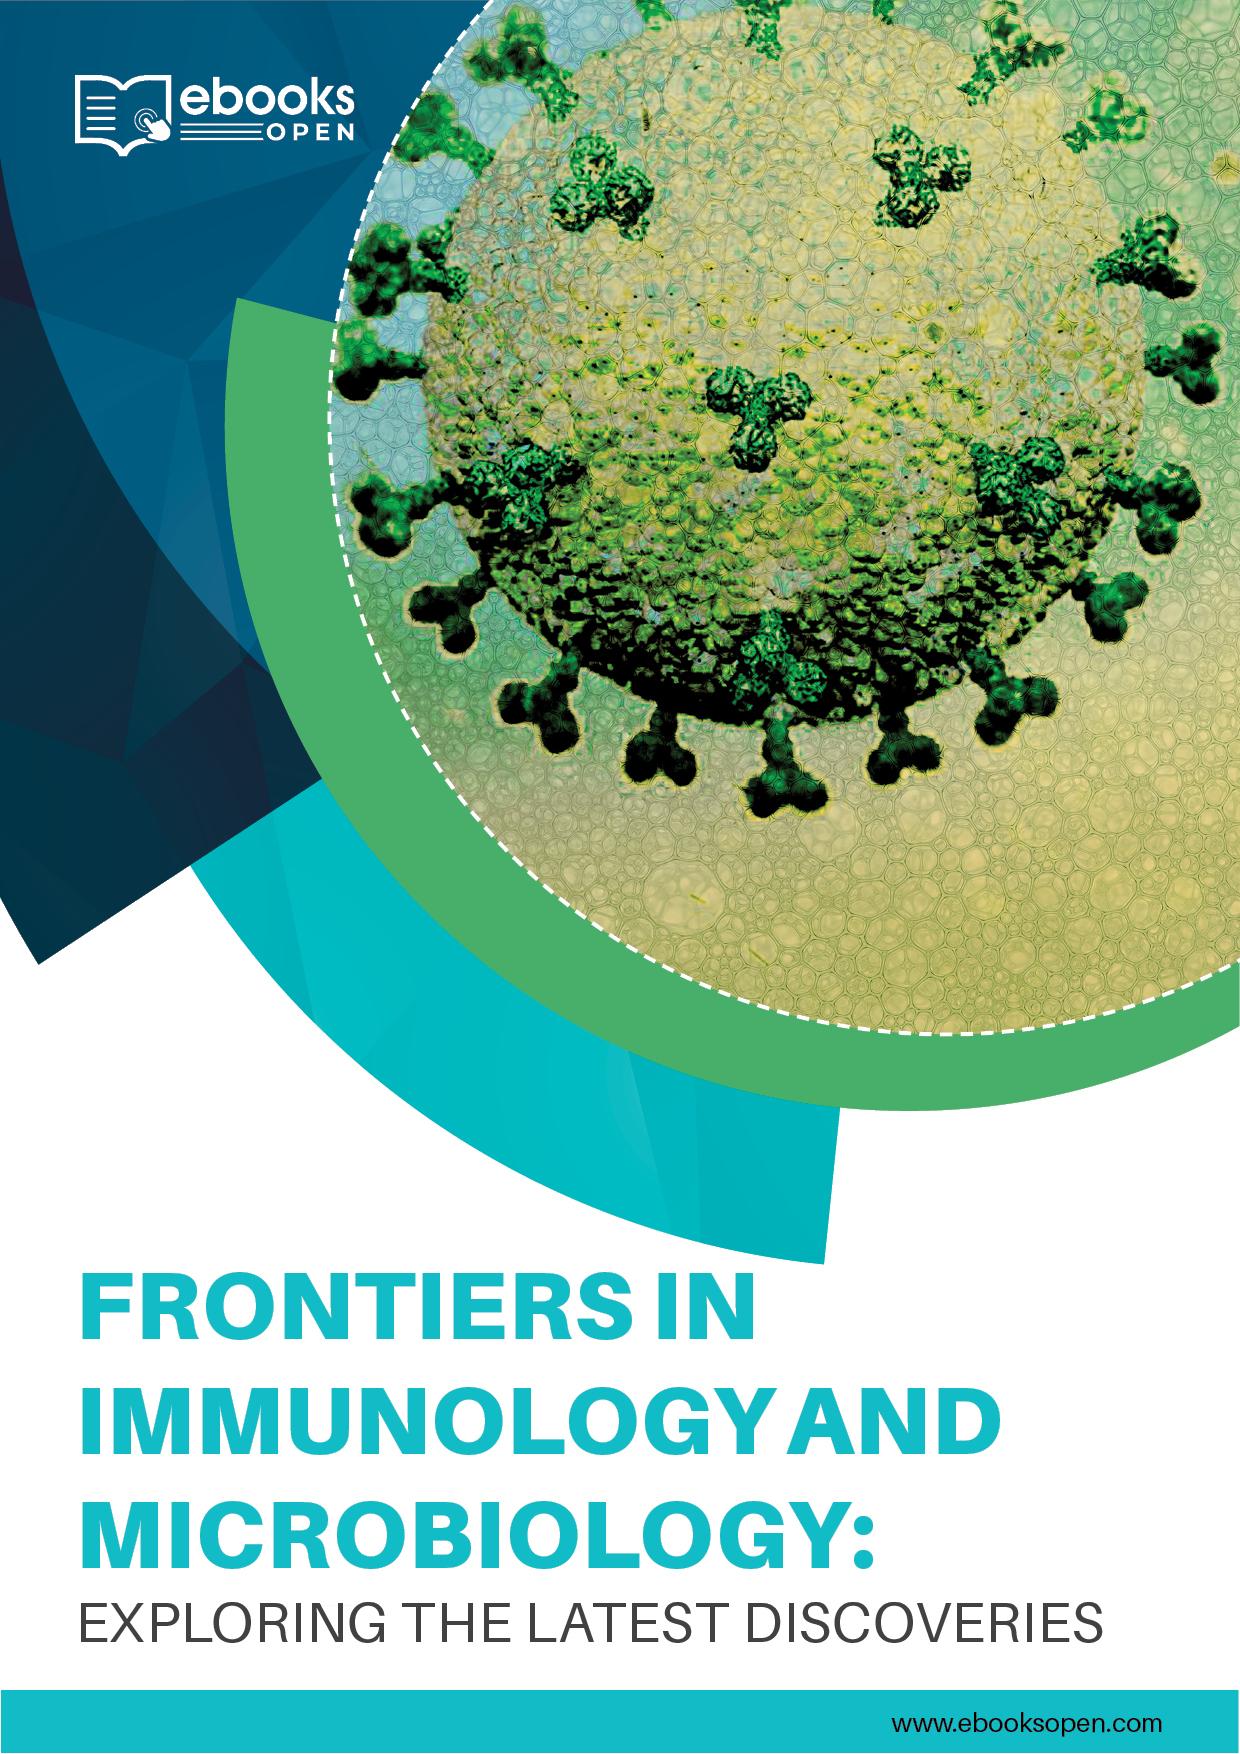 Frontiers in Immunology and Microbiology: Exploring the Latest Discoveries